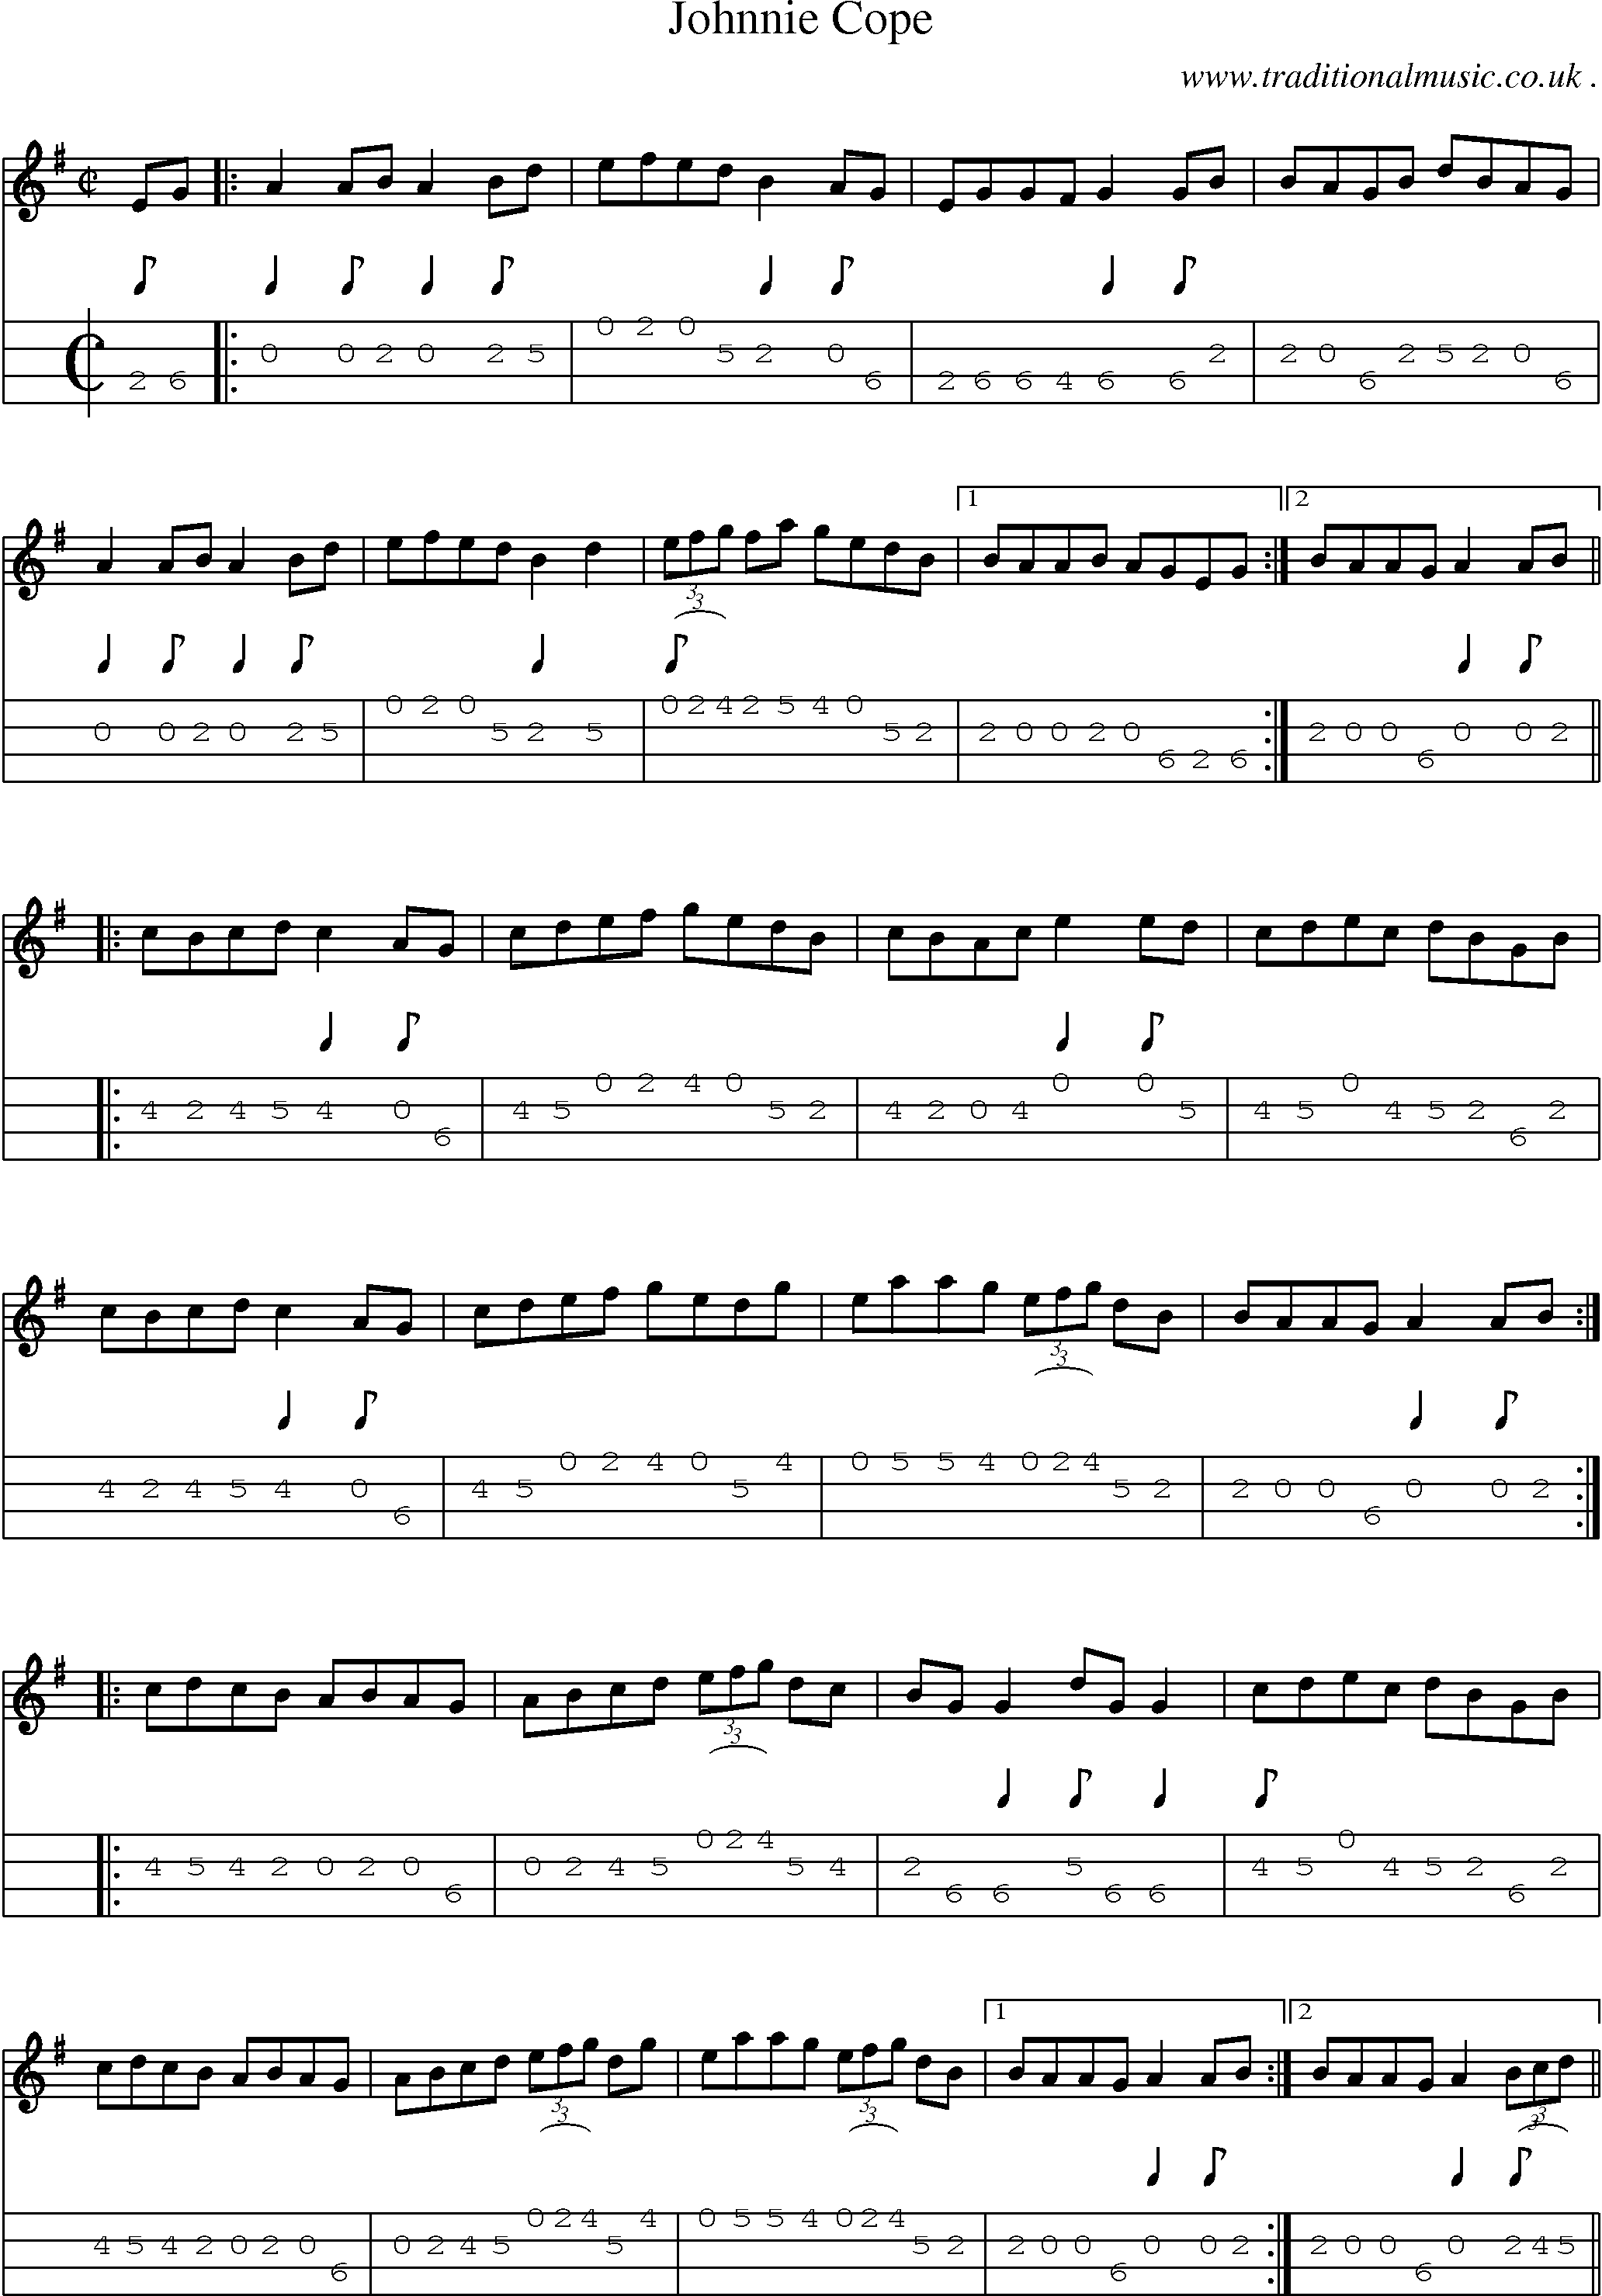 Sheet-Music and Mandolin Tabs for Johnnie Cope